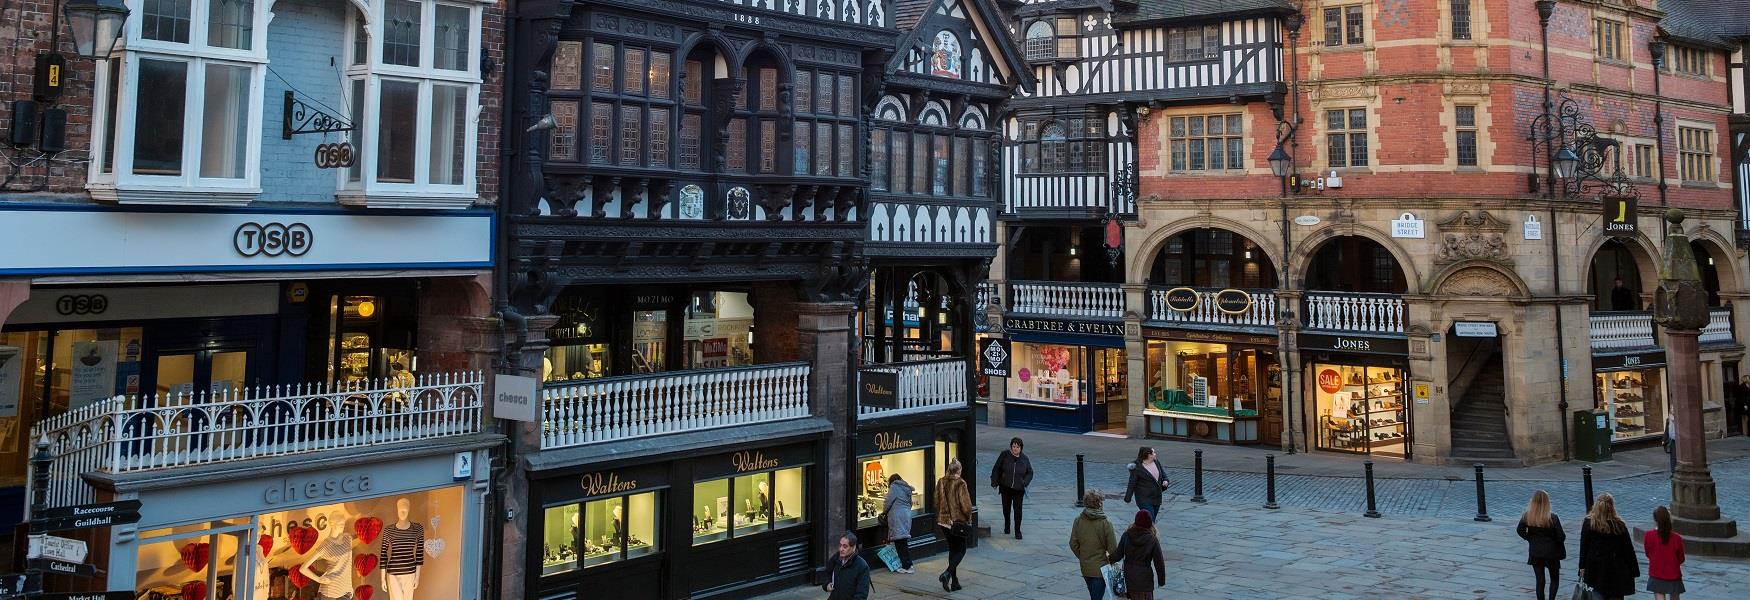 Shops on the Rows, Chester